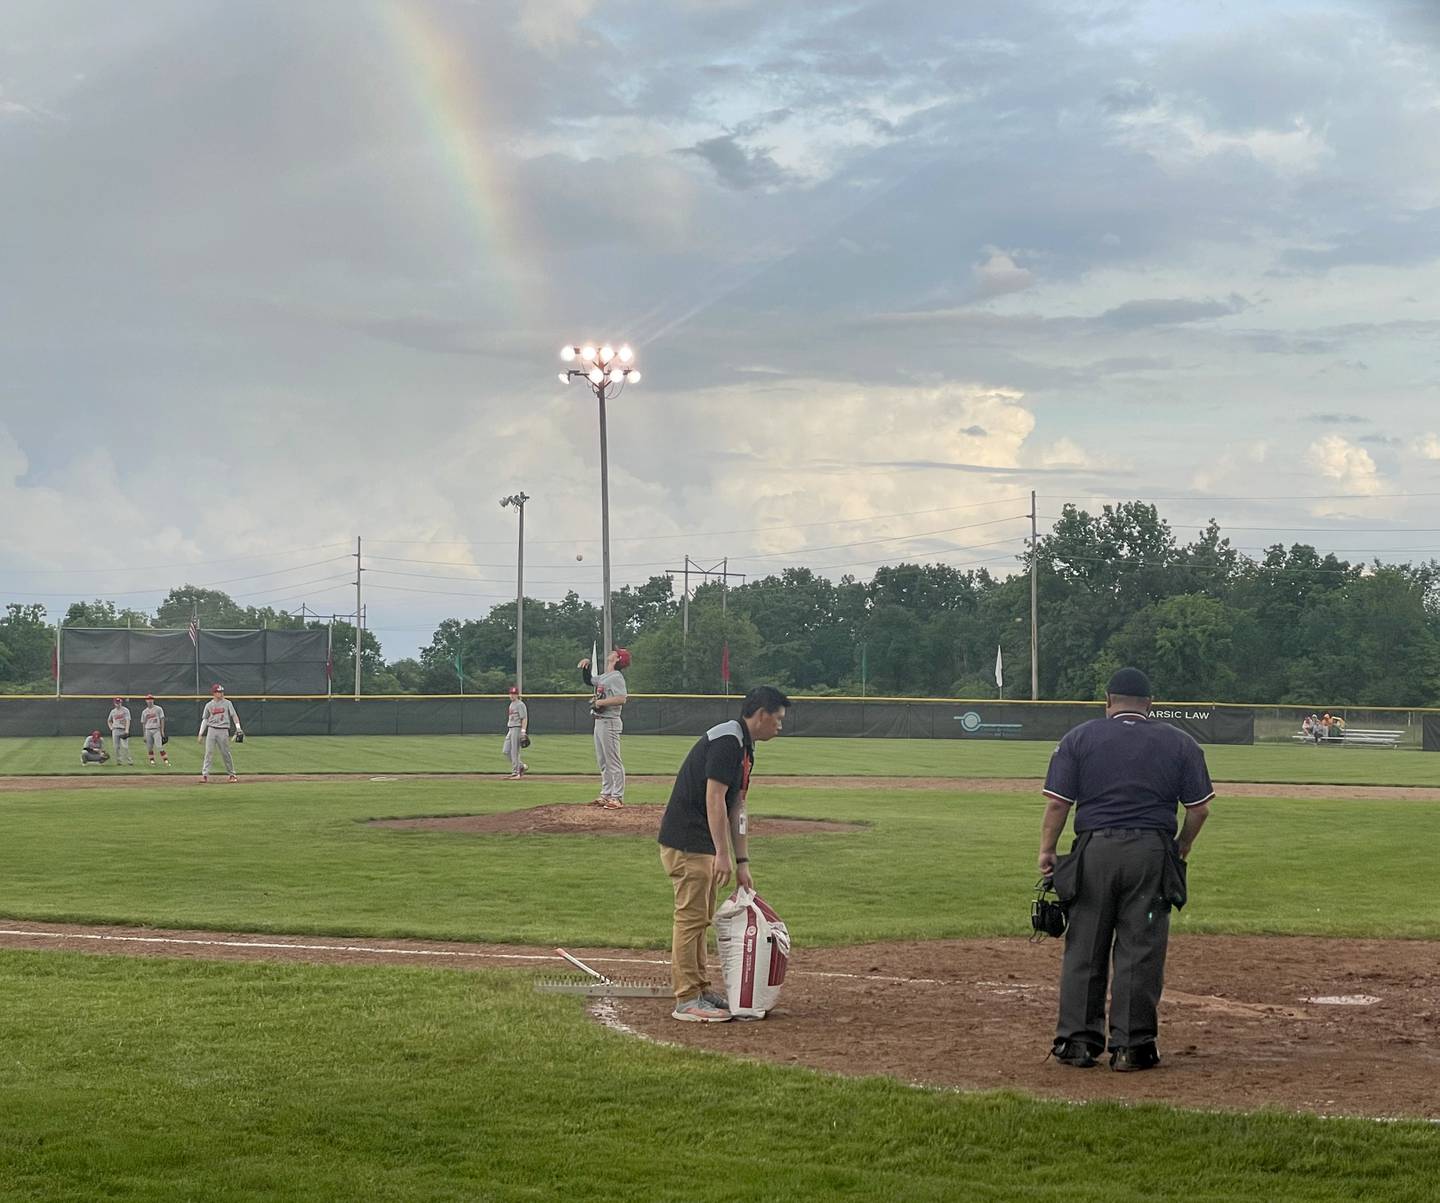 La Salle-Peru athletic director Dan Lee carries a bag of diamond dry compound to home plate as a rainbow appears after a brief downpour during the game between Ottawa and Rock Island in the Class 3A La Salle-Peru Regional on Wednesday, May 25, 2022, at Dickinson Field in Oglesby.